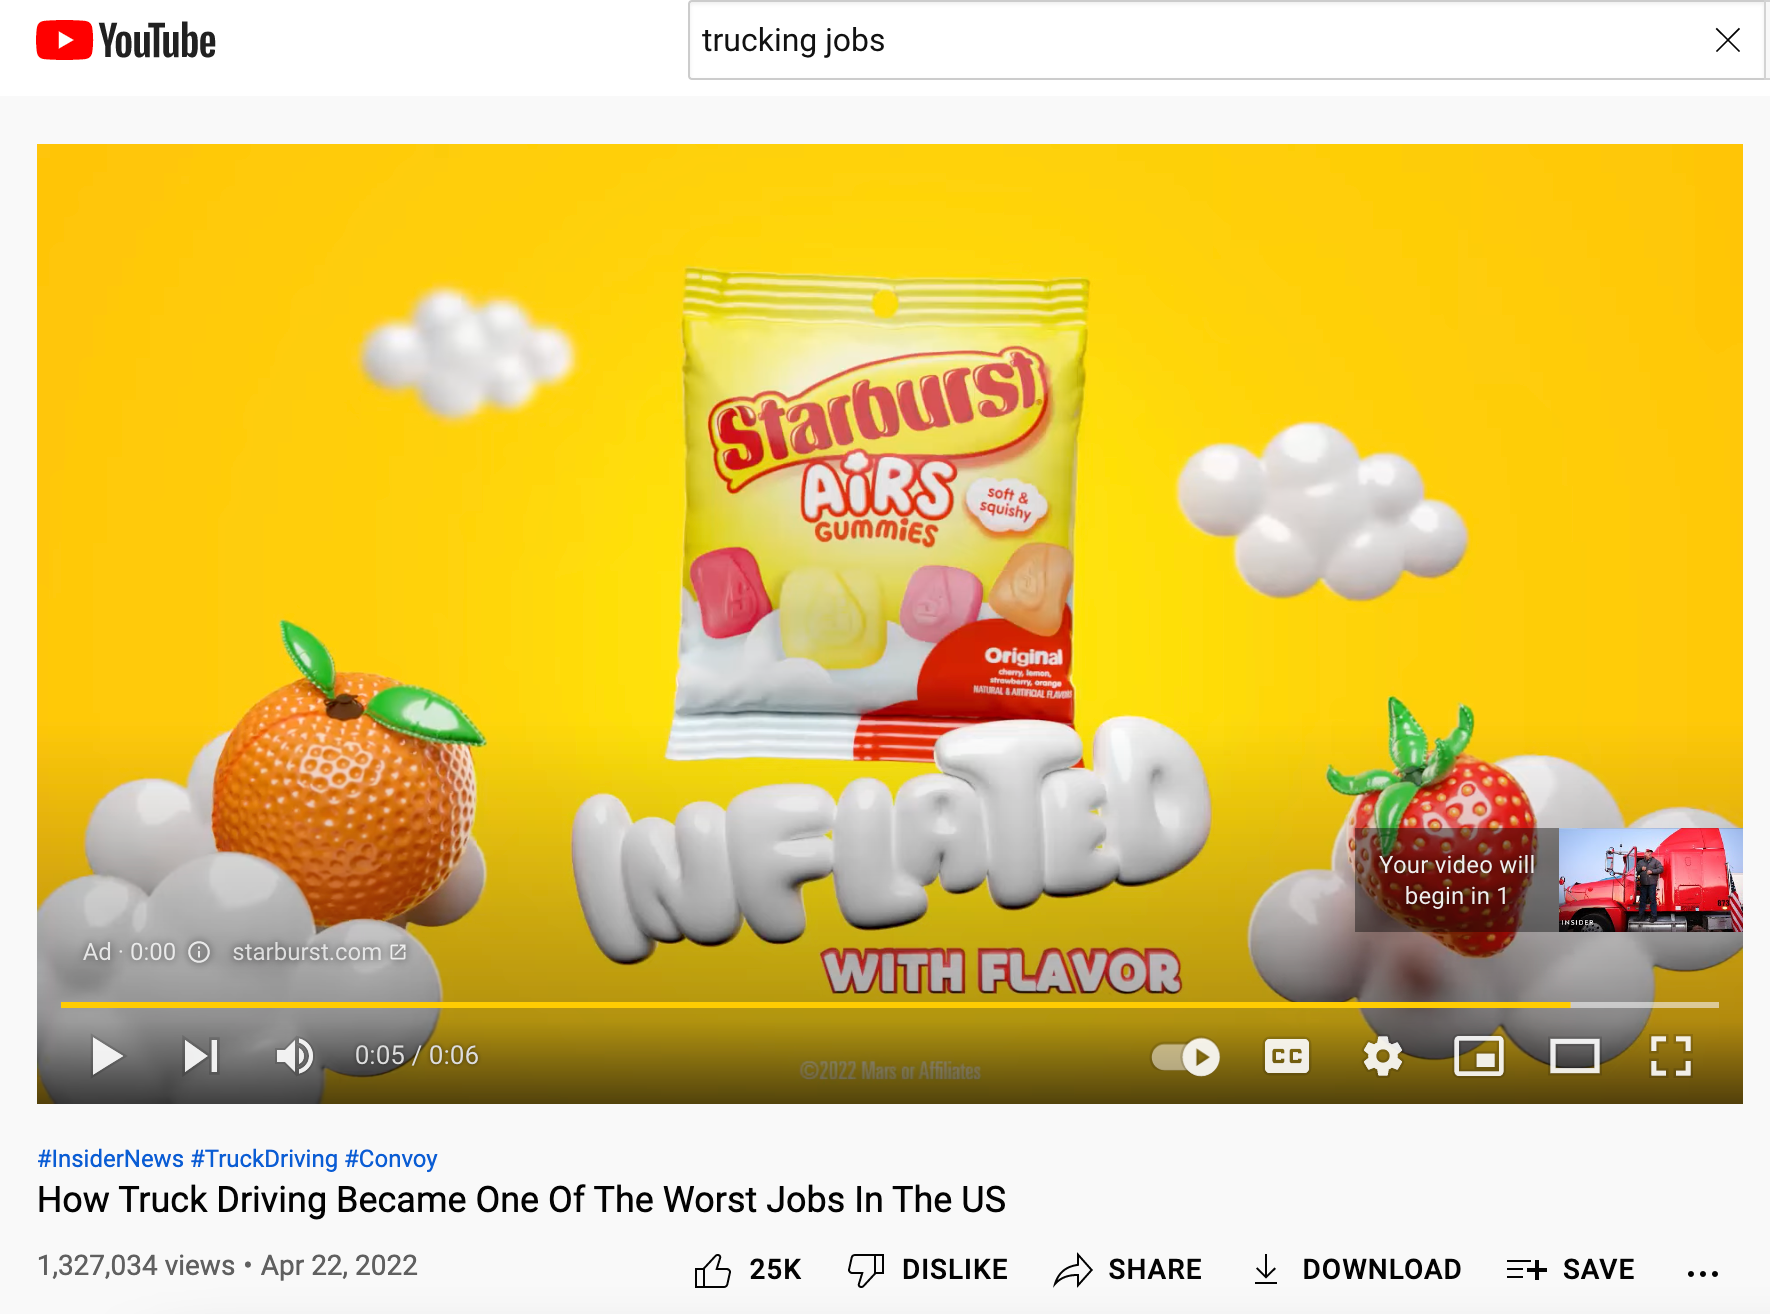 Example of a YouTube Ad